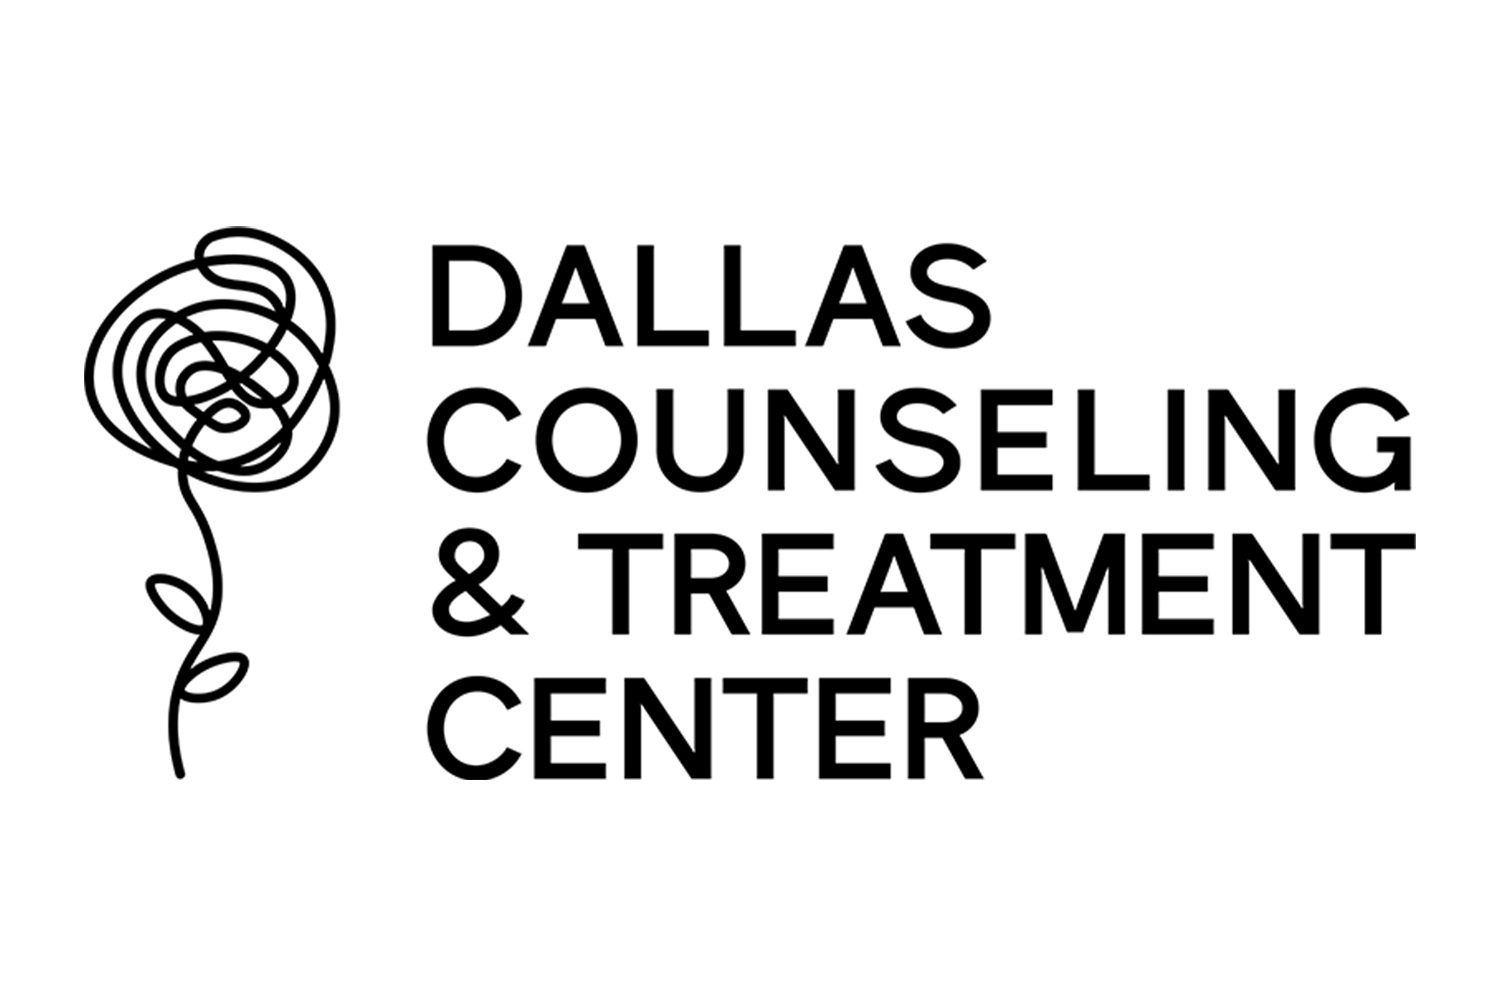 Dallas Counseling & Treatment Center